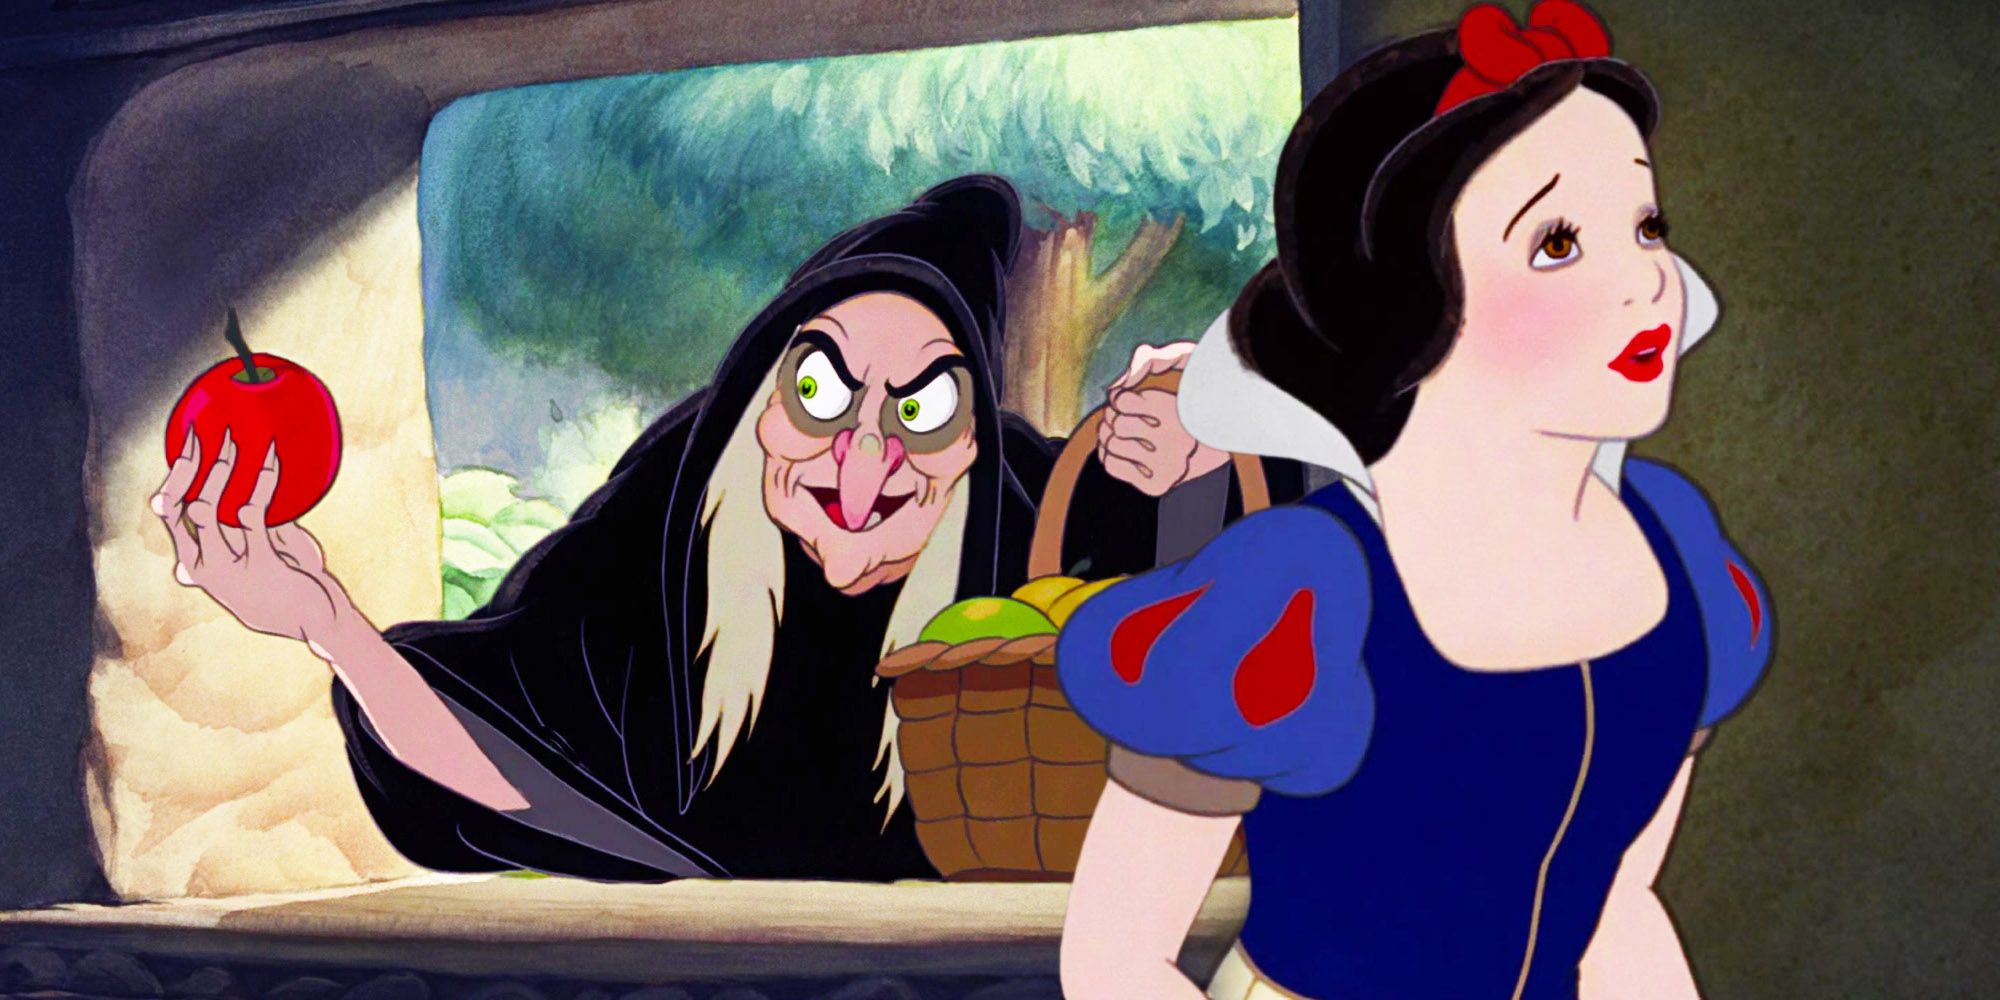 Disney: 20 Best Quotes From Snow White